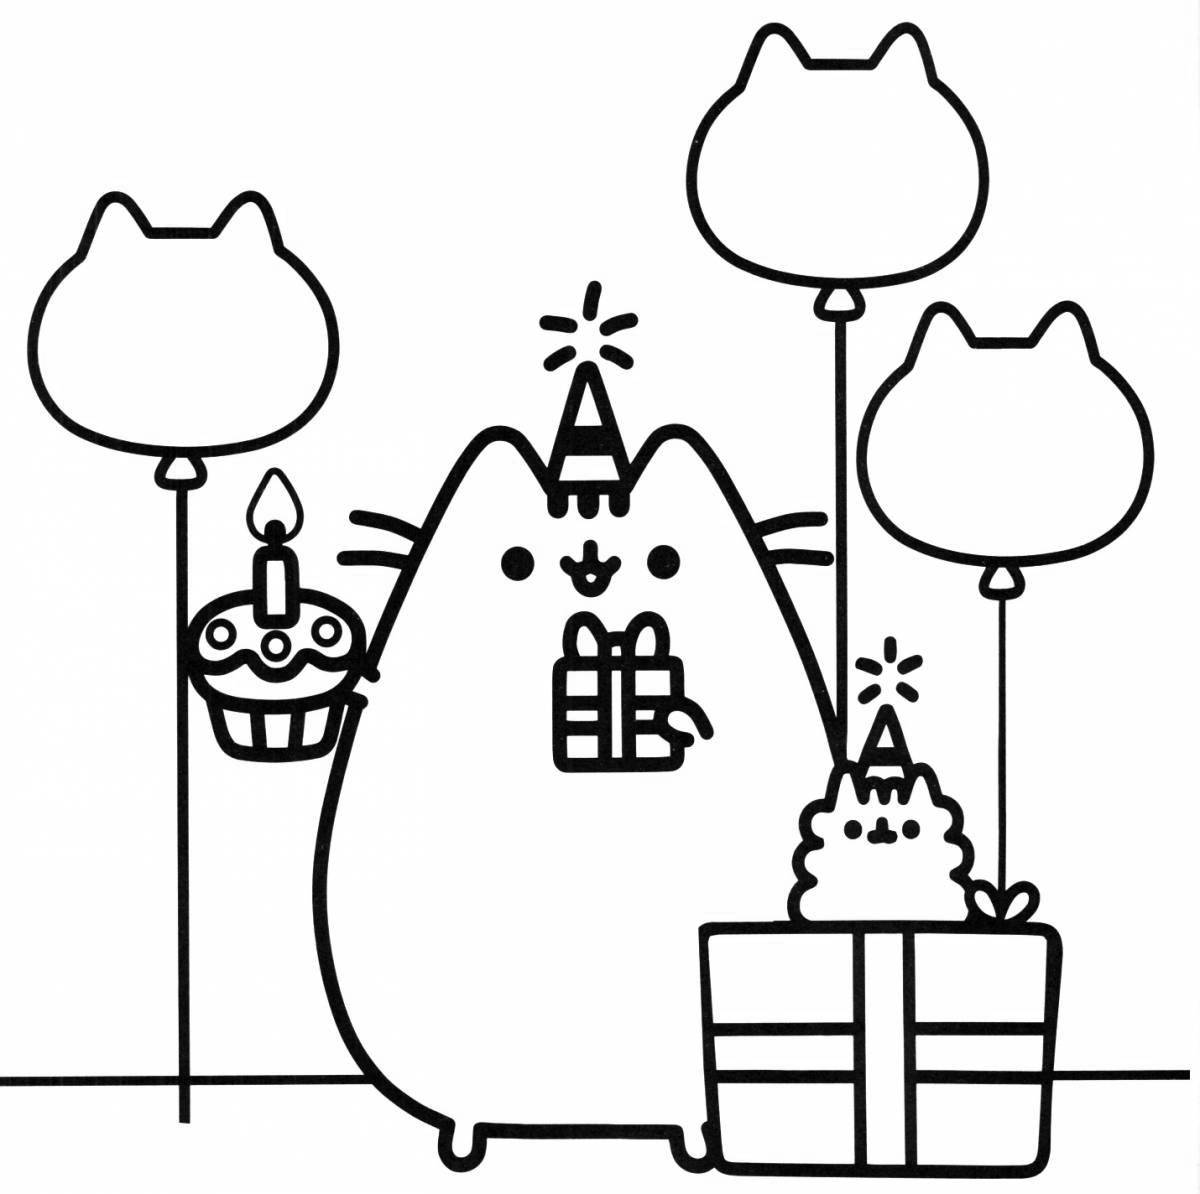 Silly kawaii cats coloring page